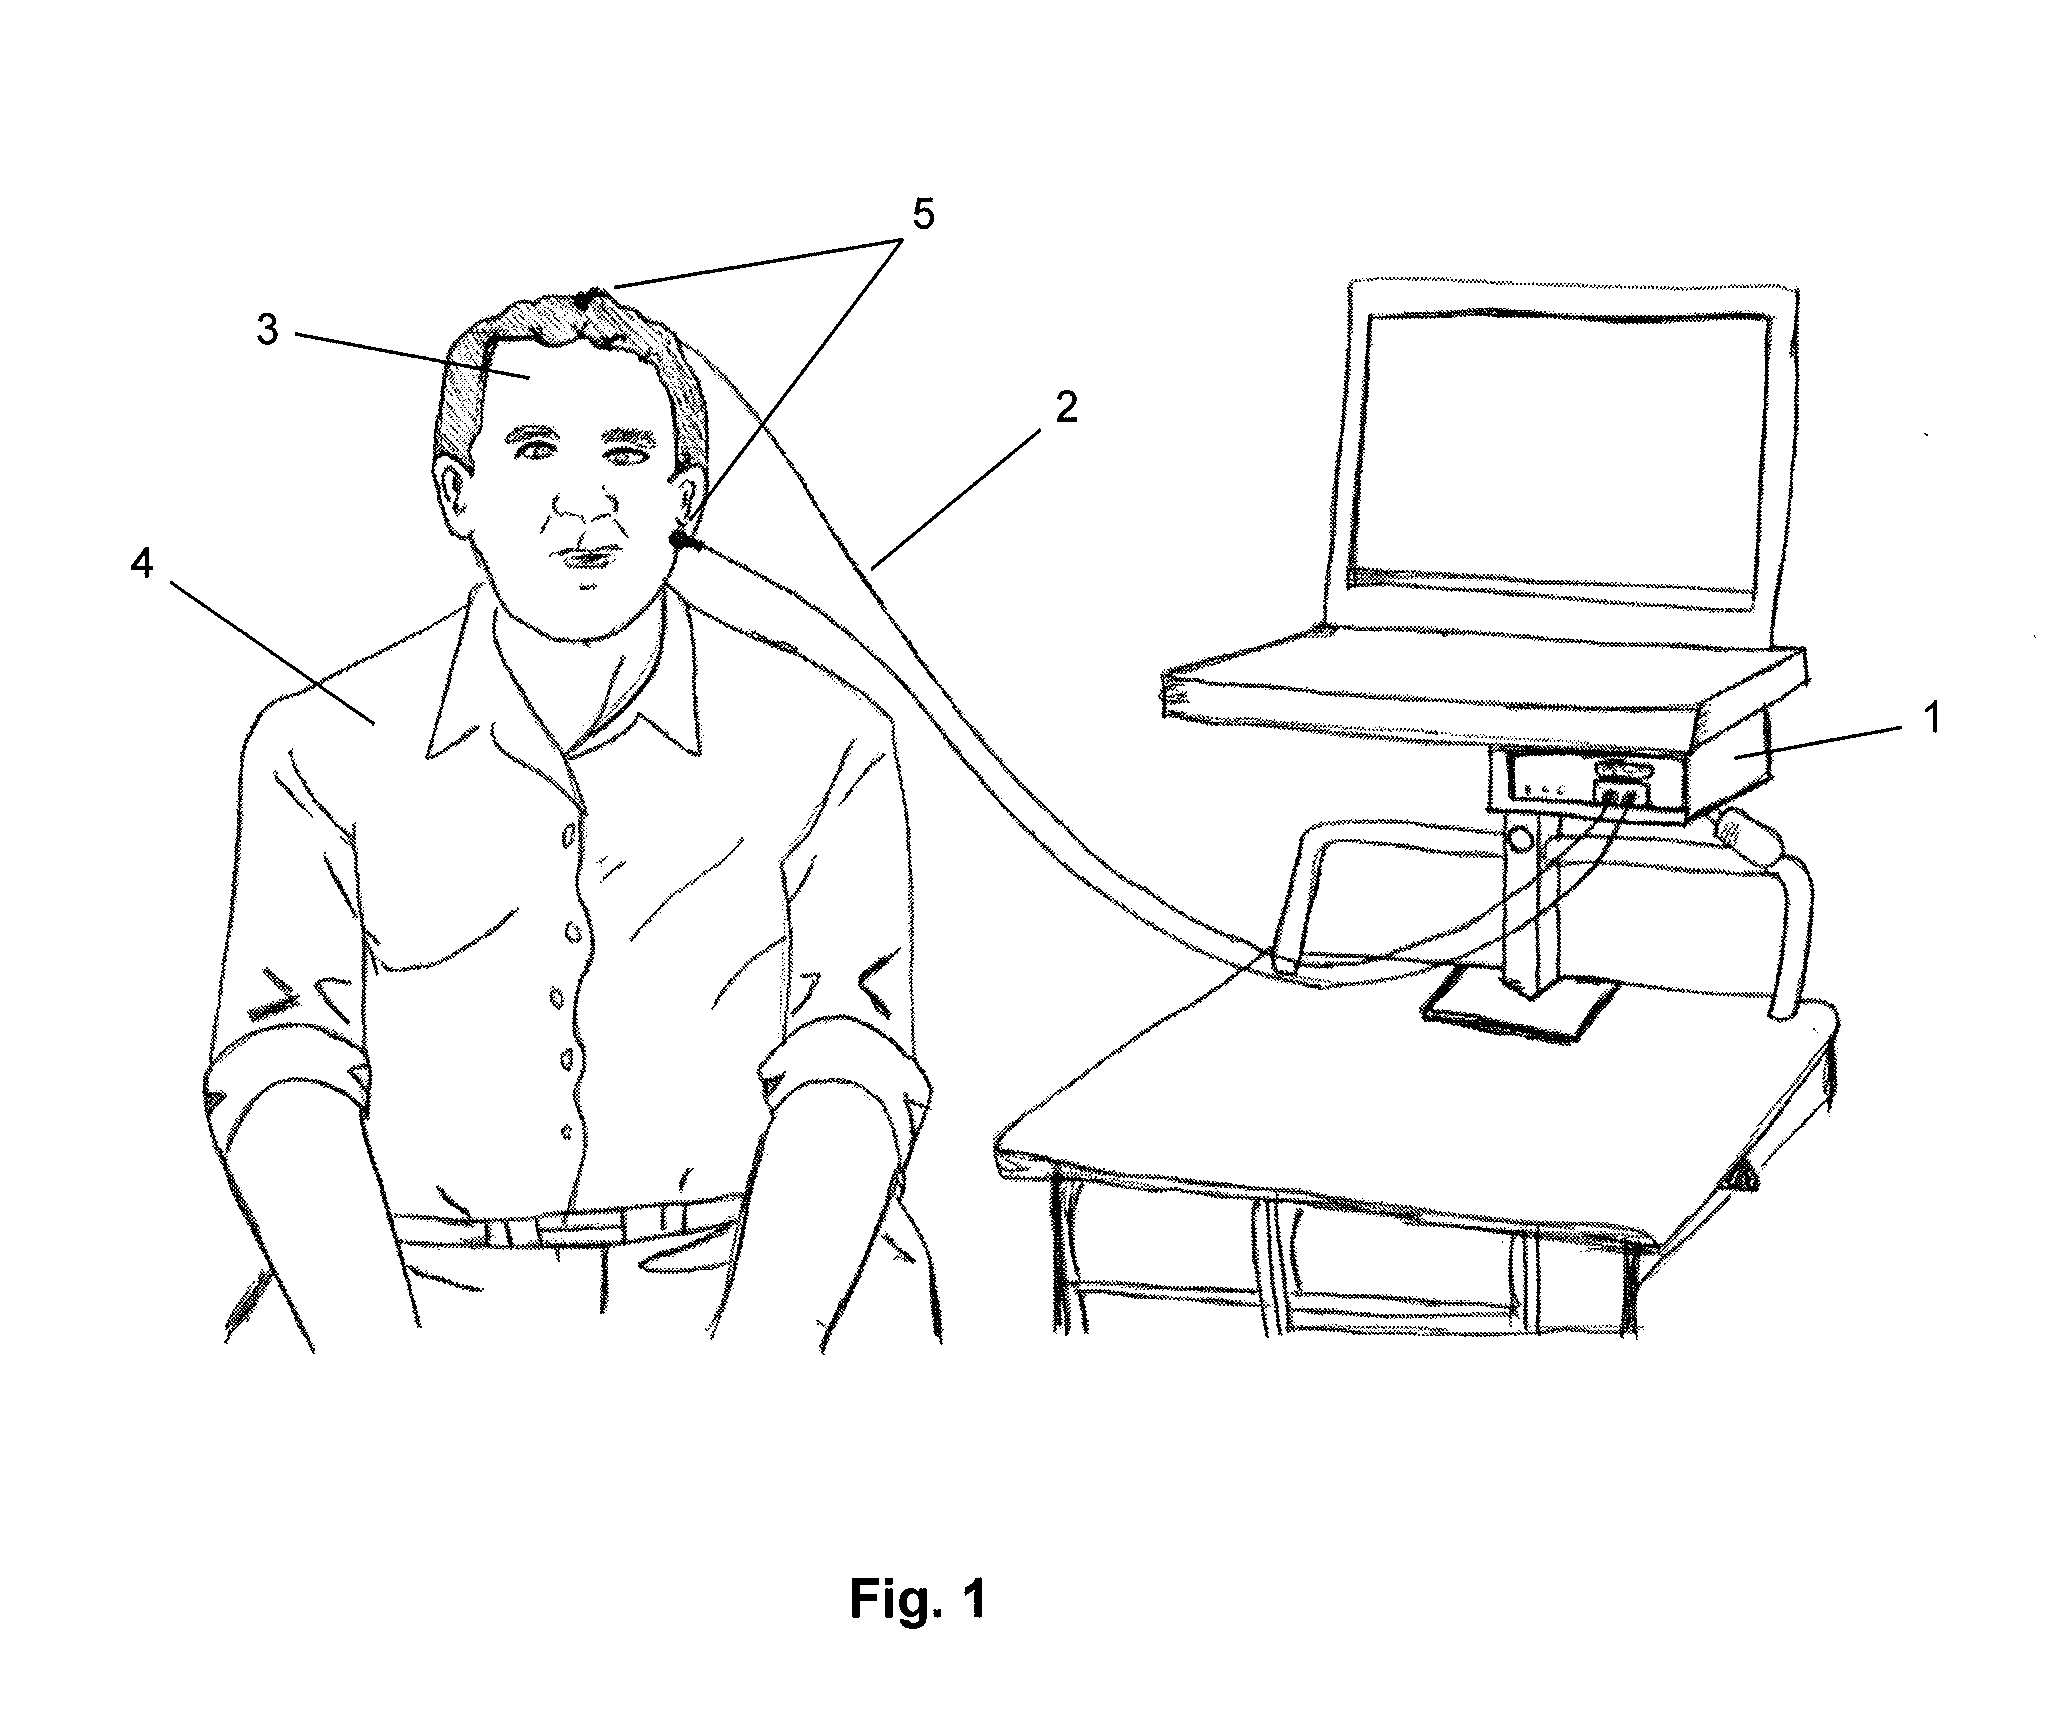 Methods and apparatus for electrical stimulation